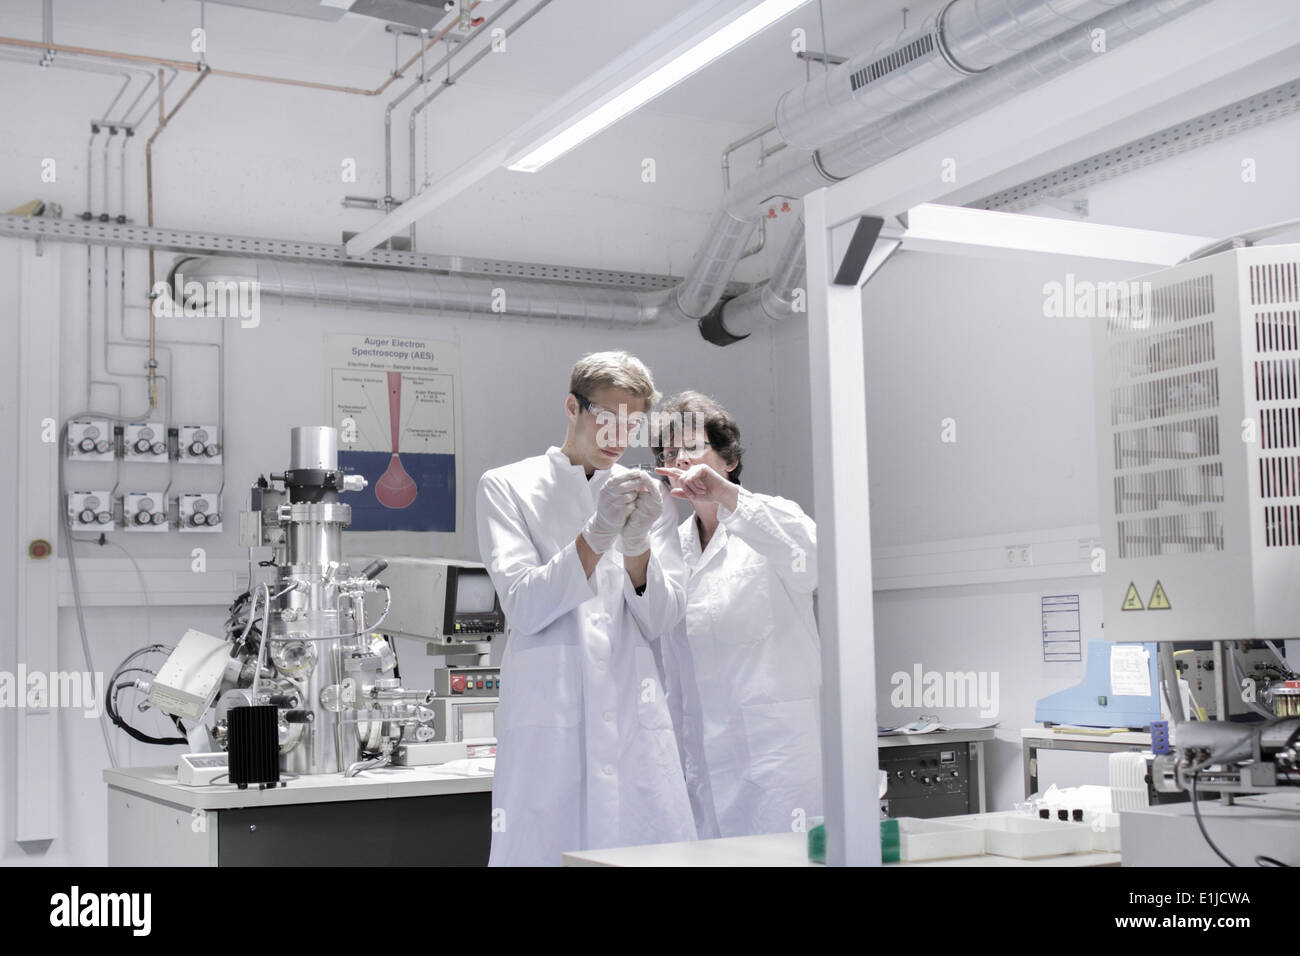 Two scientists standing in analytical laboratory with scanning electron microscope Stock Photo